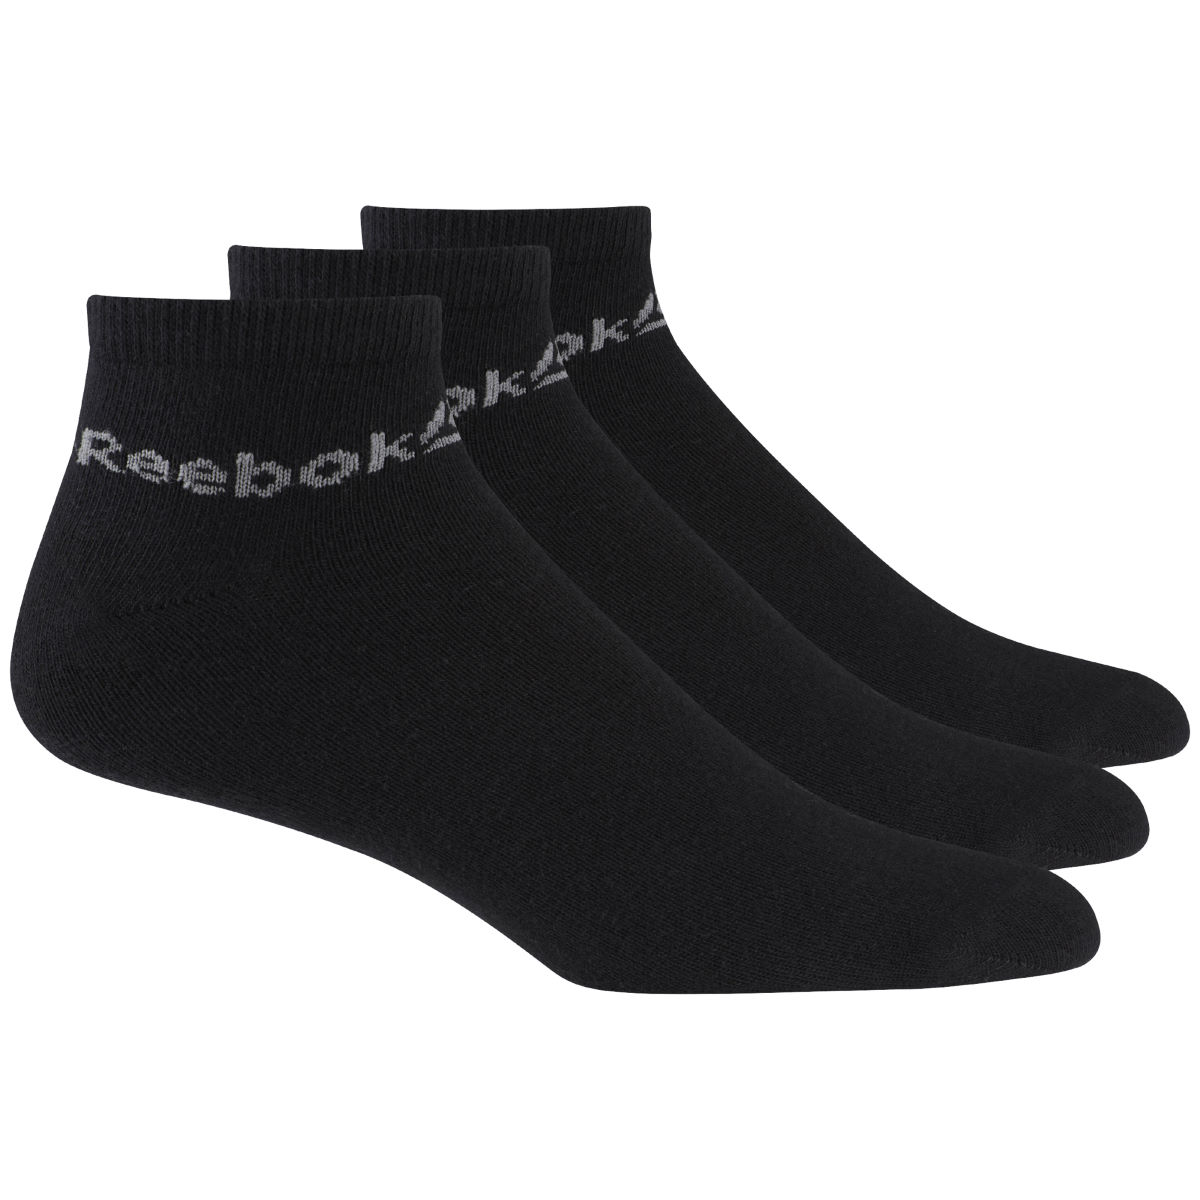 Reebok Active Core Ankle Socks 3 Pack - Calcetines